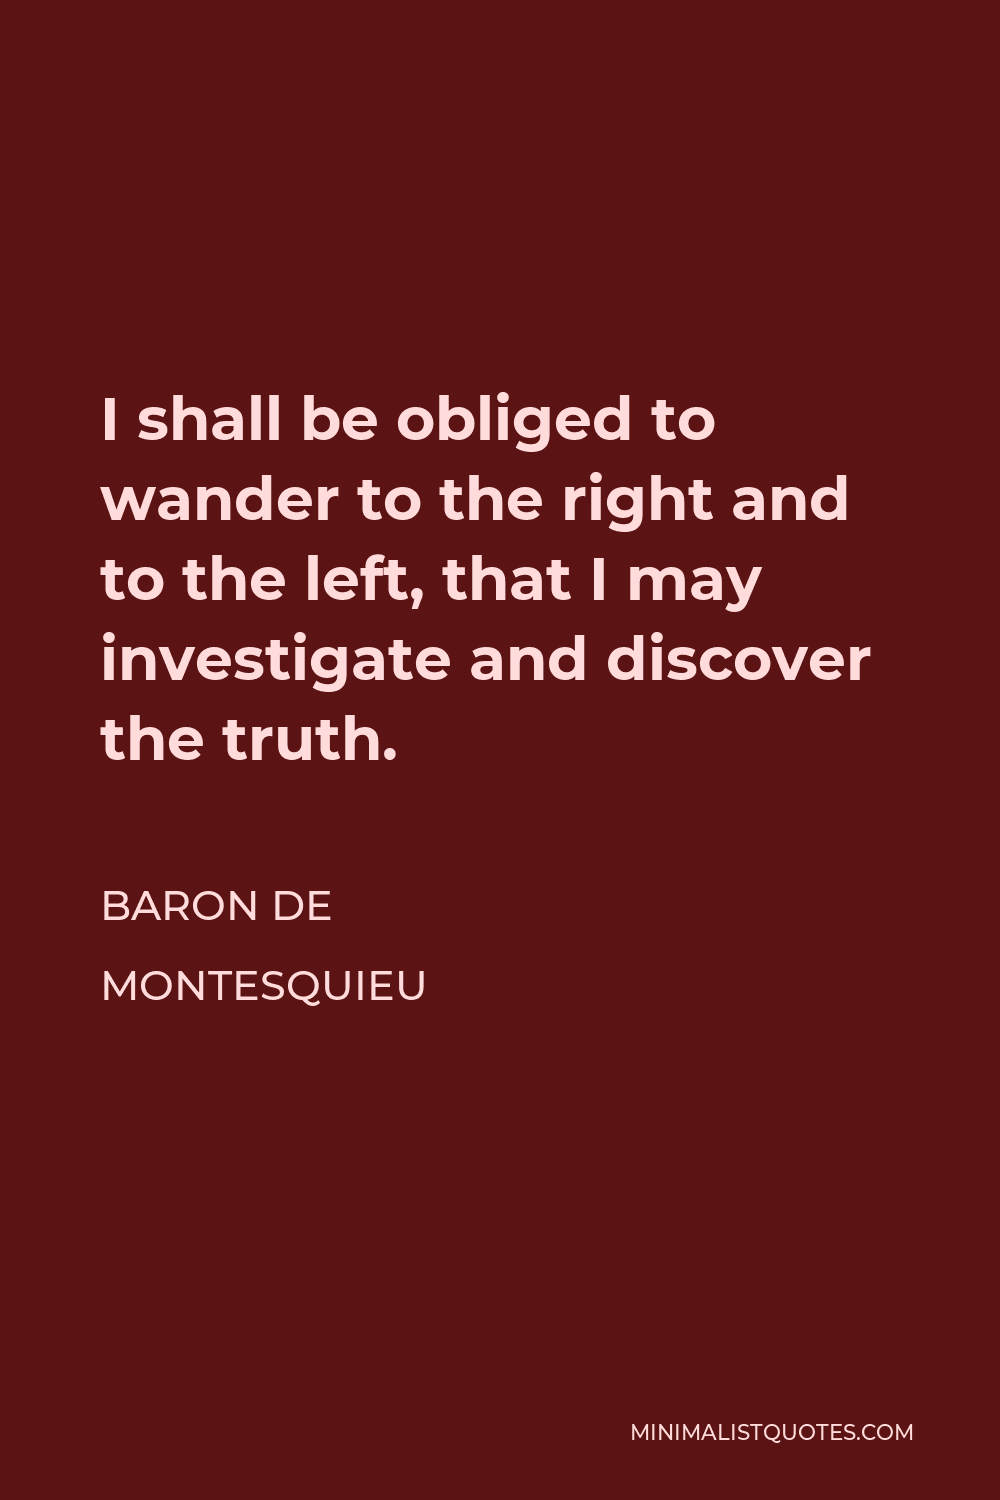 Baron de Montesquieu Quote - I shall be obliged to wander to the right and to the left, that I may investigate and discover the truth.